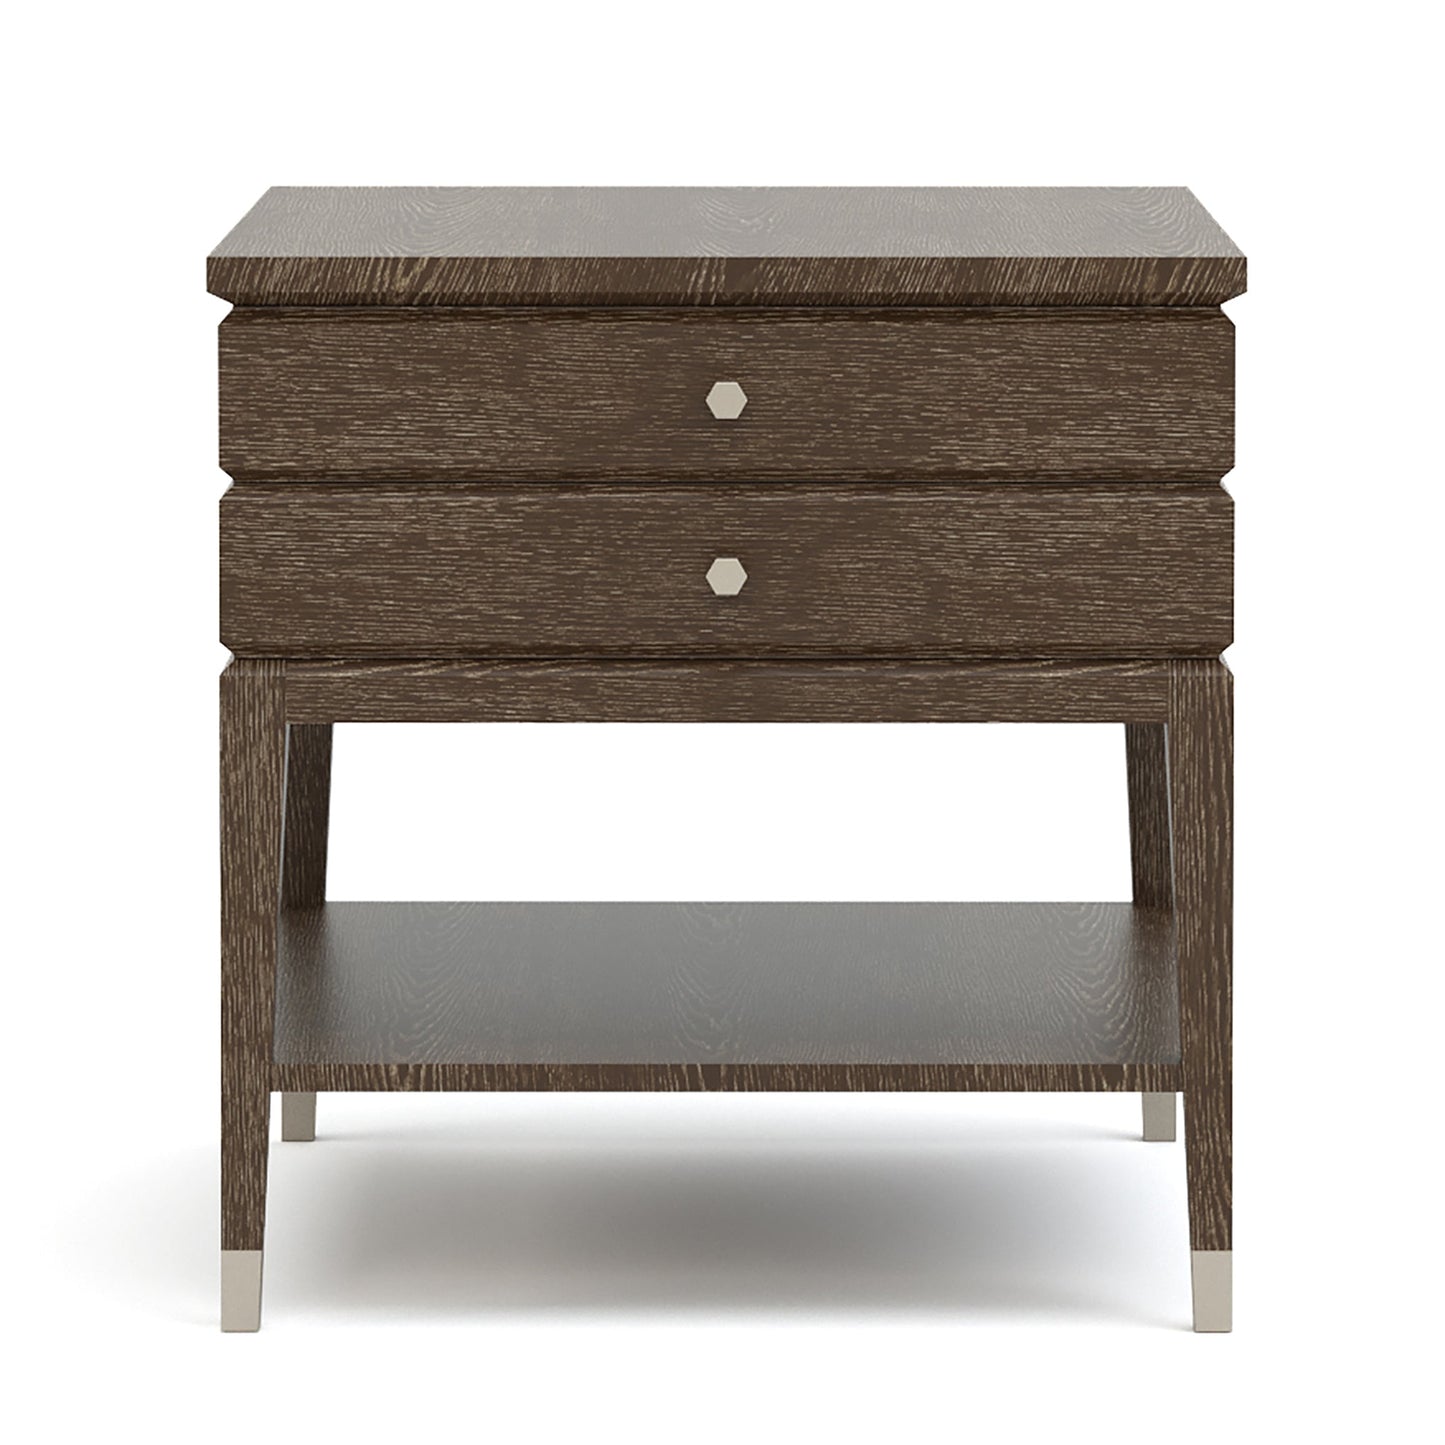 Maidstone Two-Drawer Side Table in 202 Pier finish